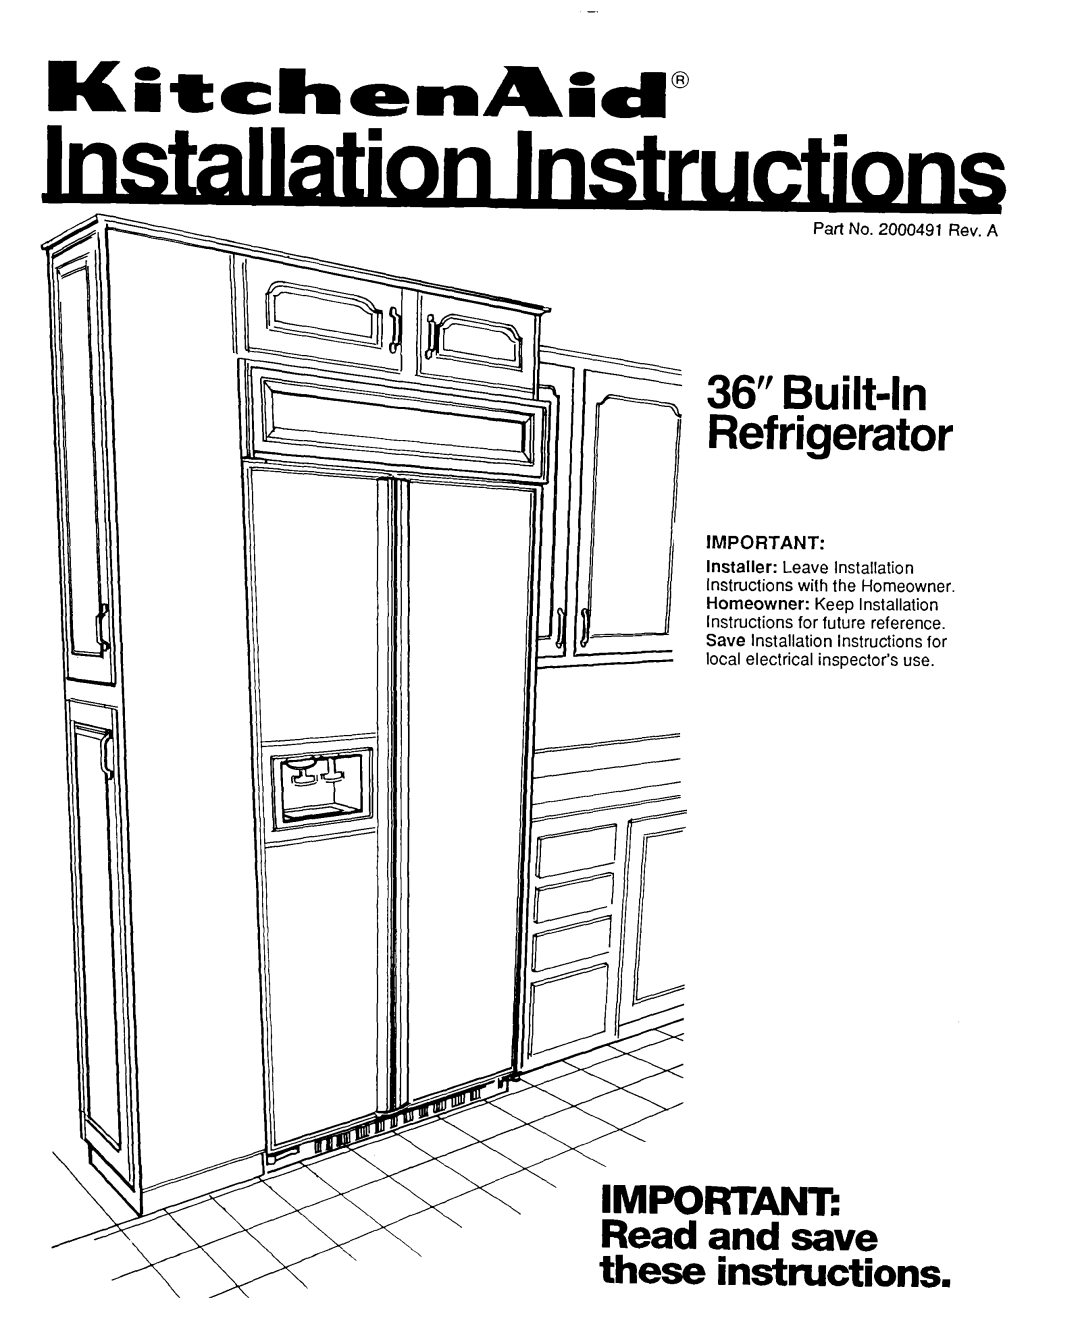 KitchenAid 2000491 installation instructions ’ IMPORTANT’r. Read and save these instructions, 36” Built-h Refrigerator 